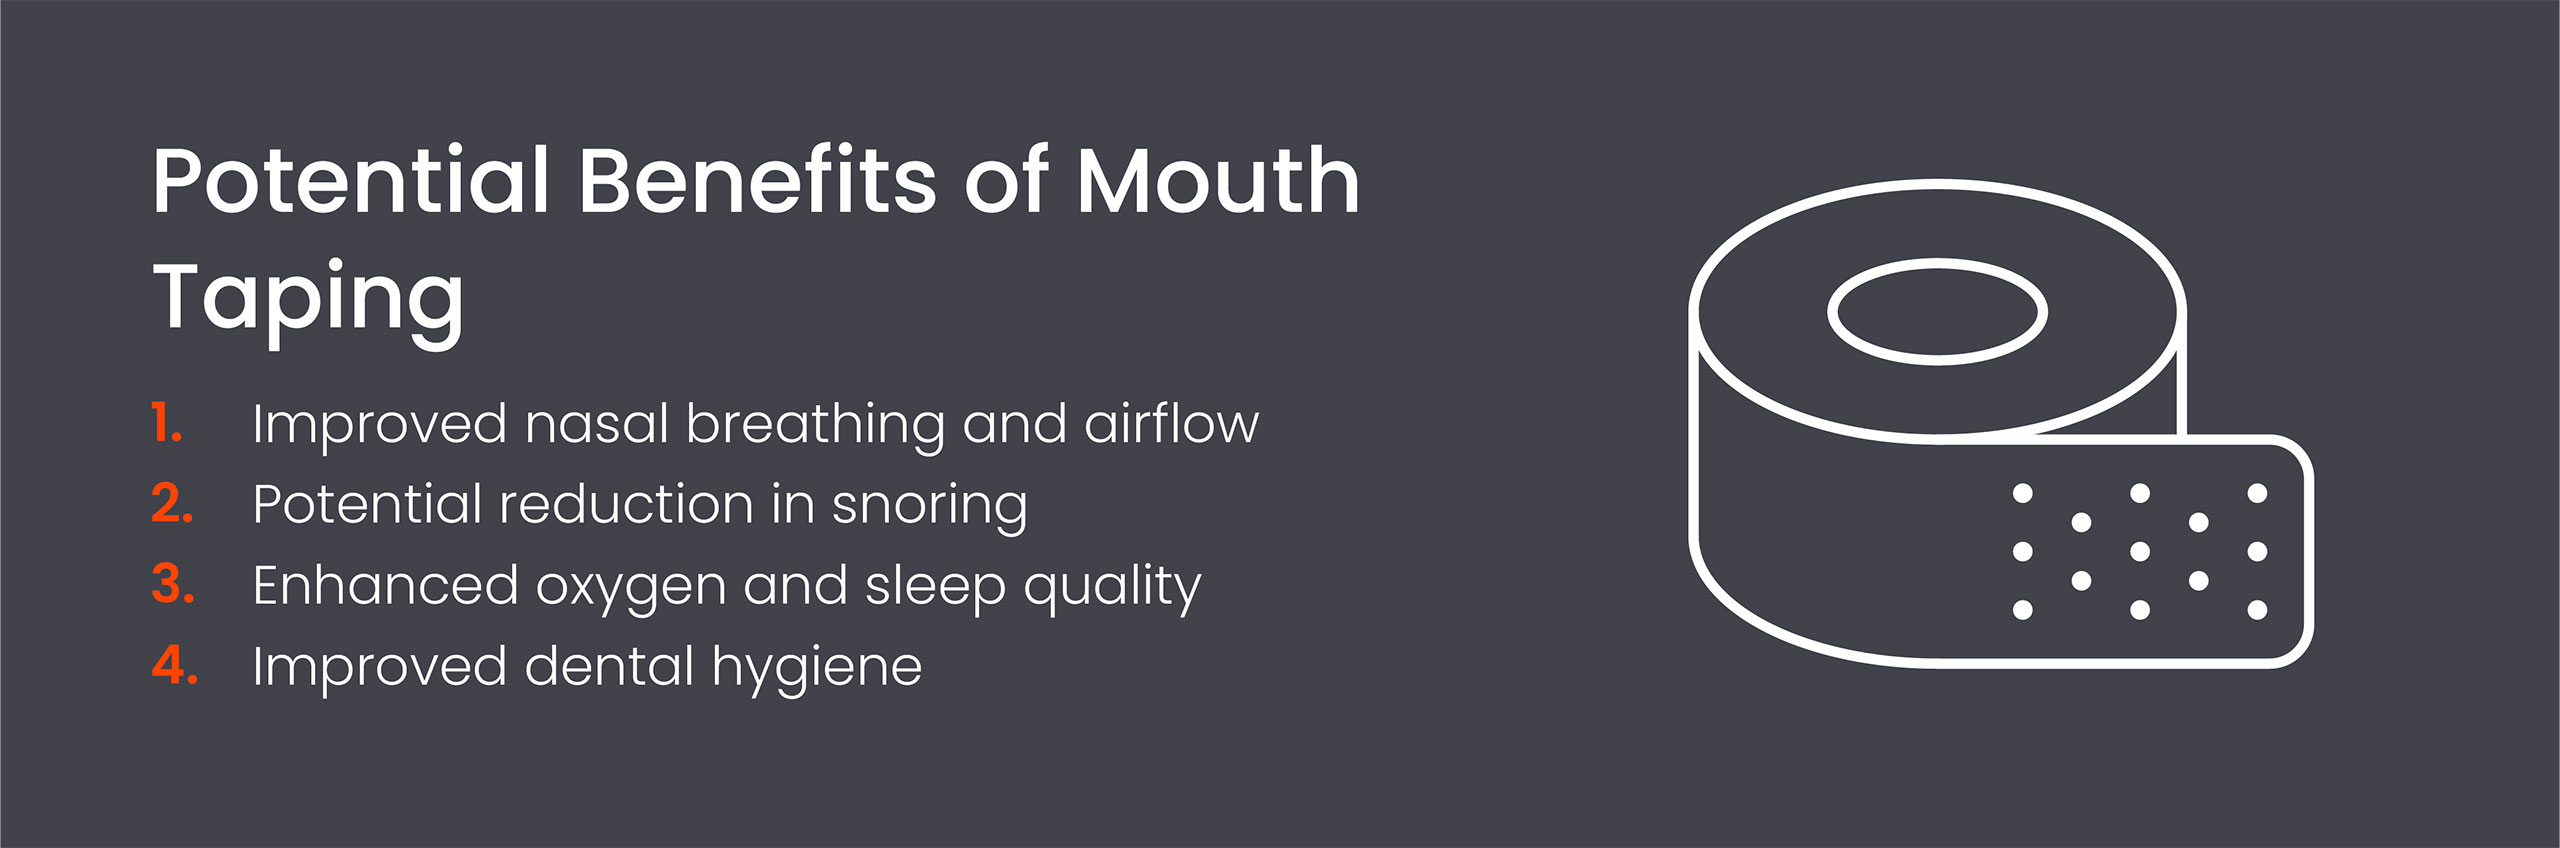 Potential benefits of mouth taping